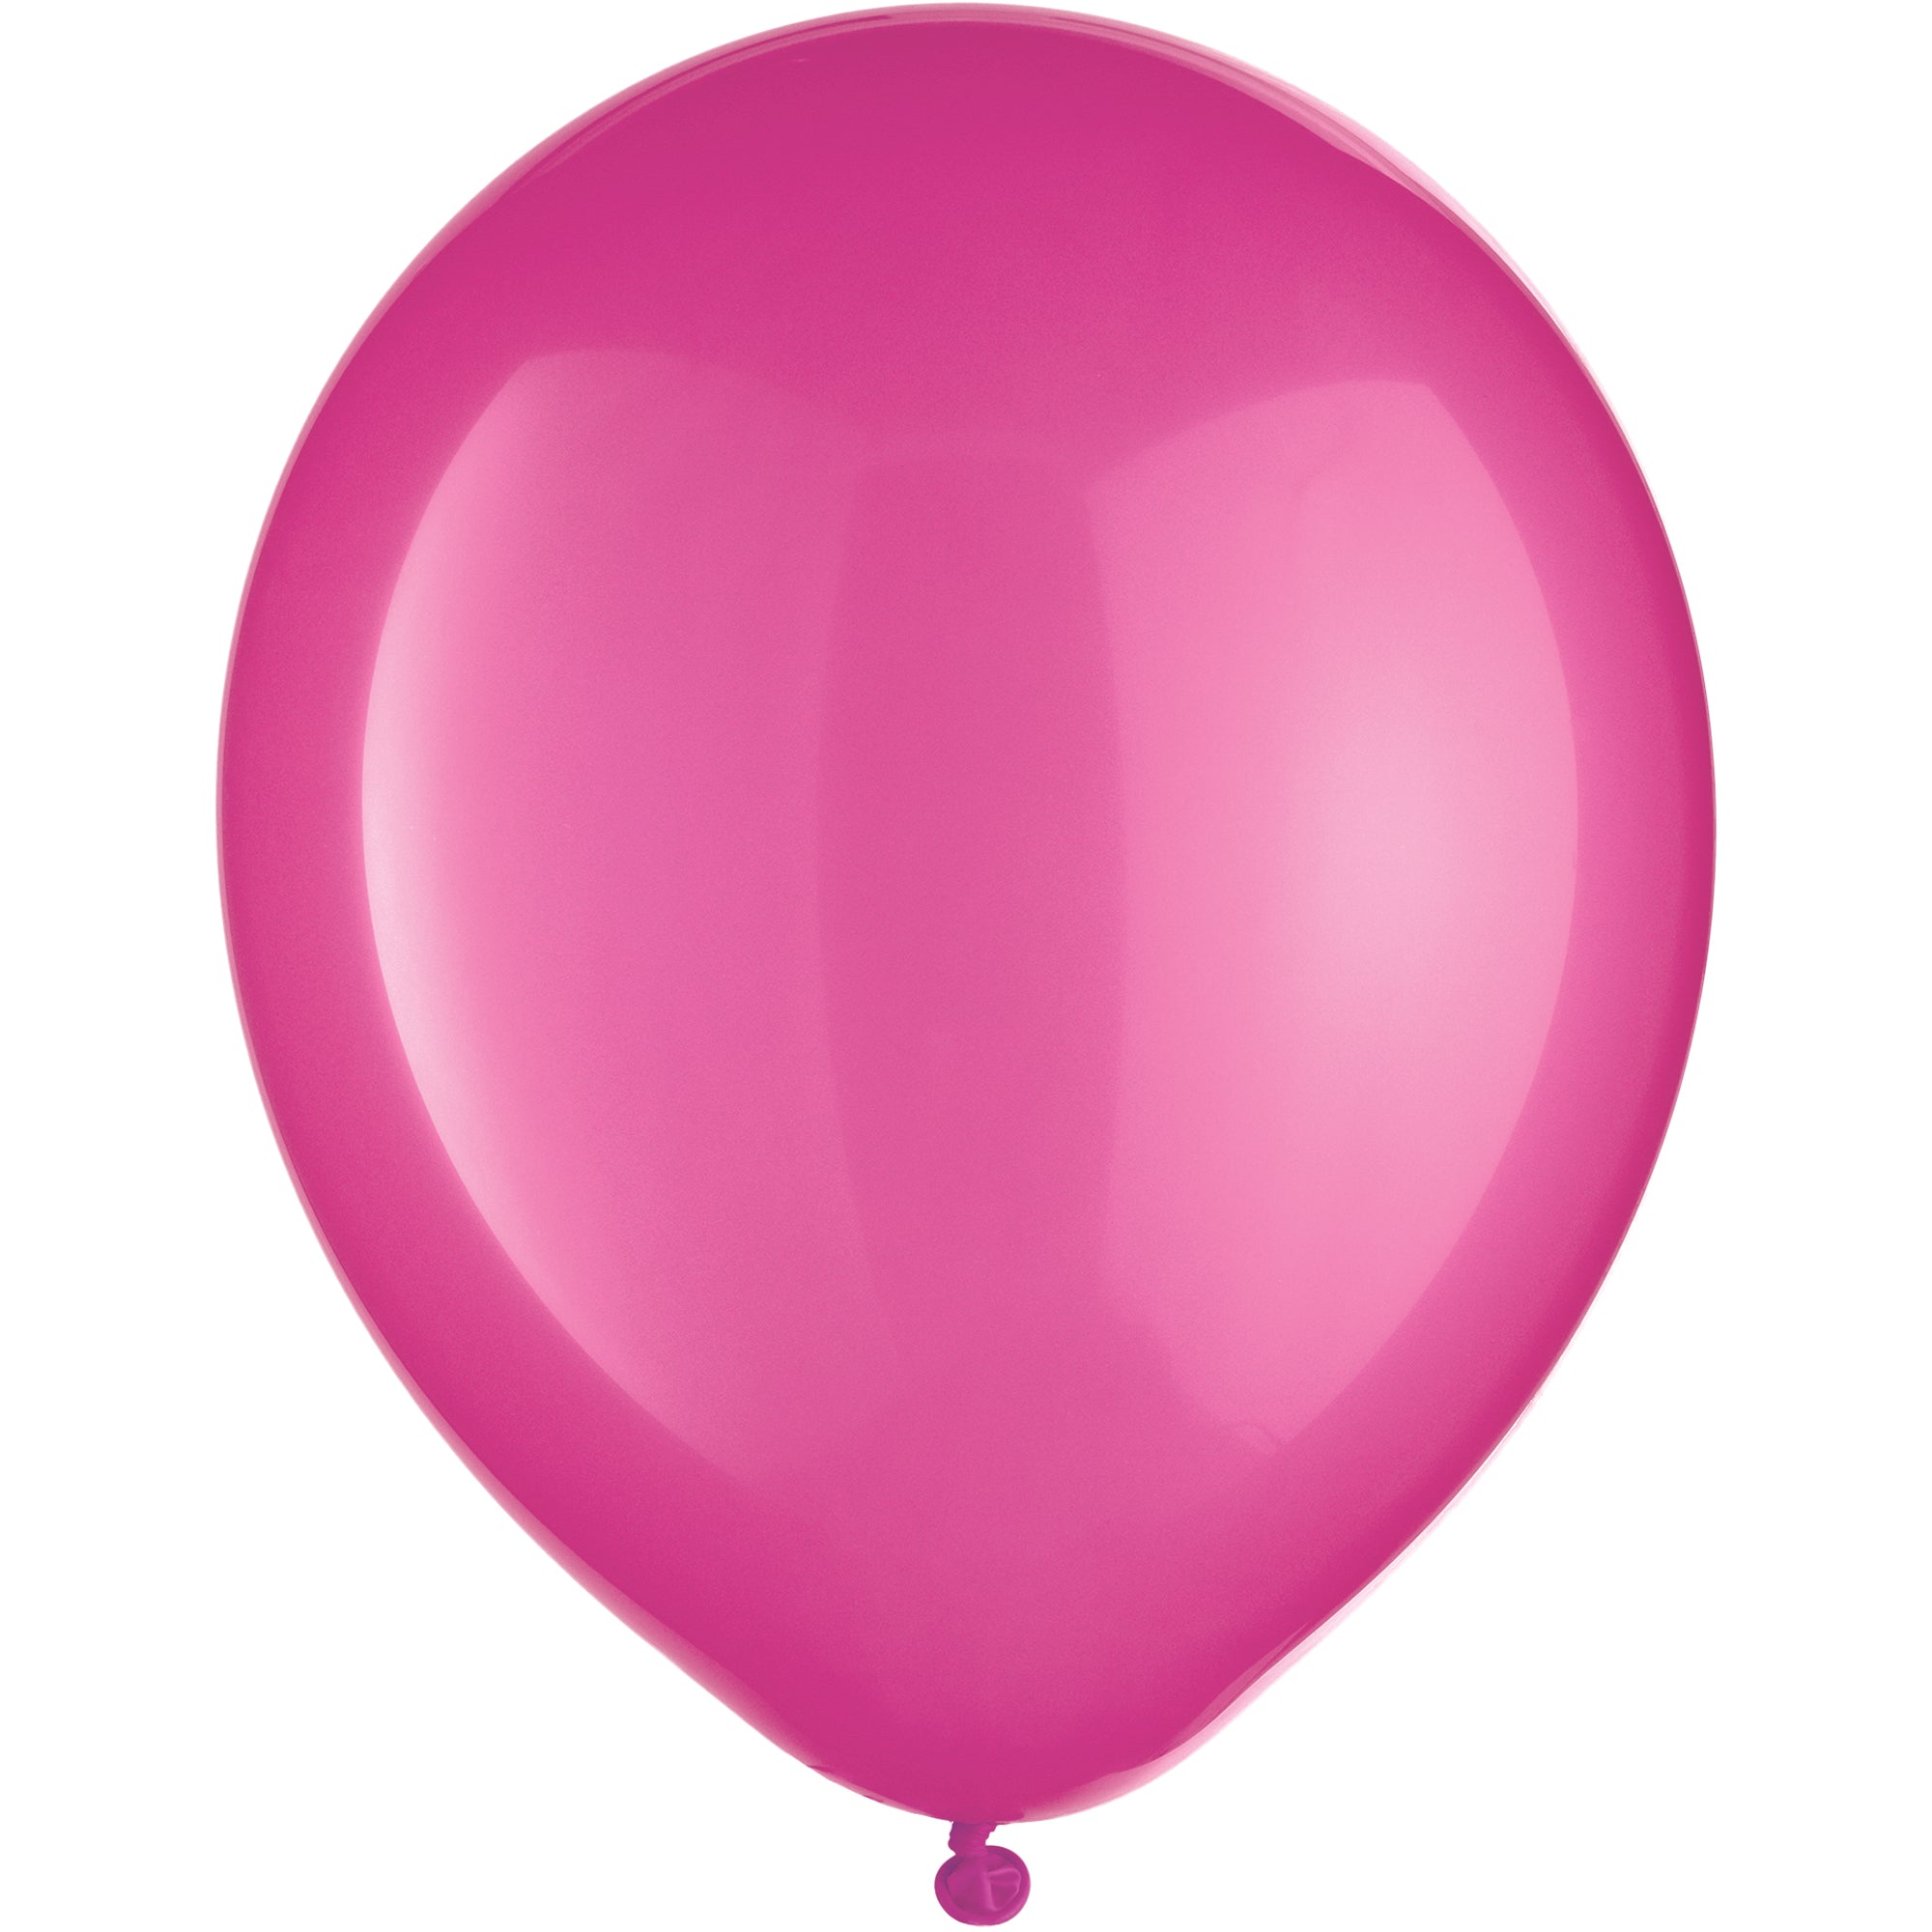 72 Latex Balloons  Bright Pink  12in